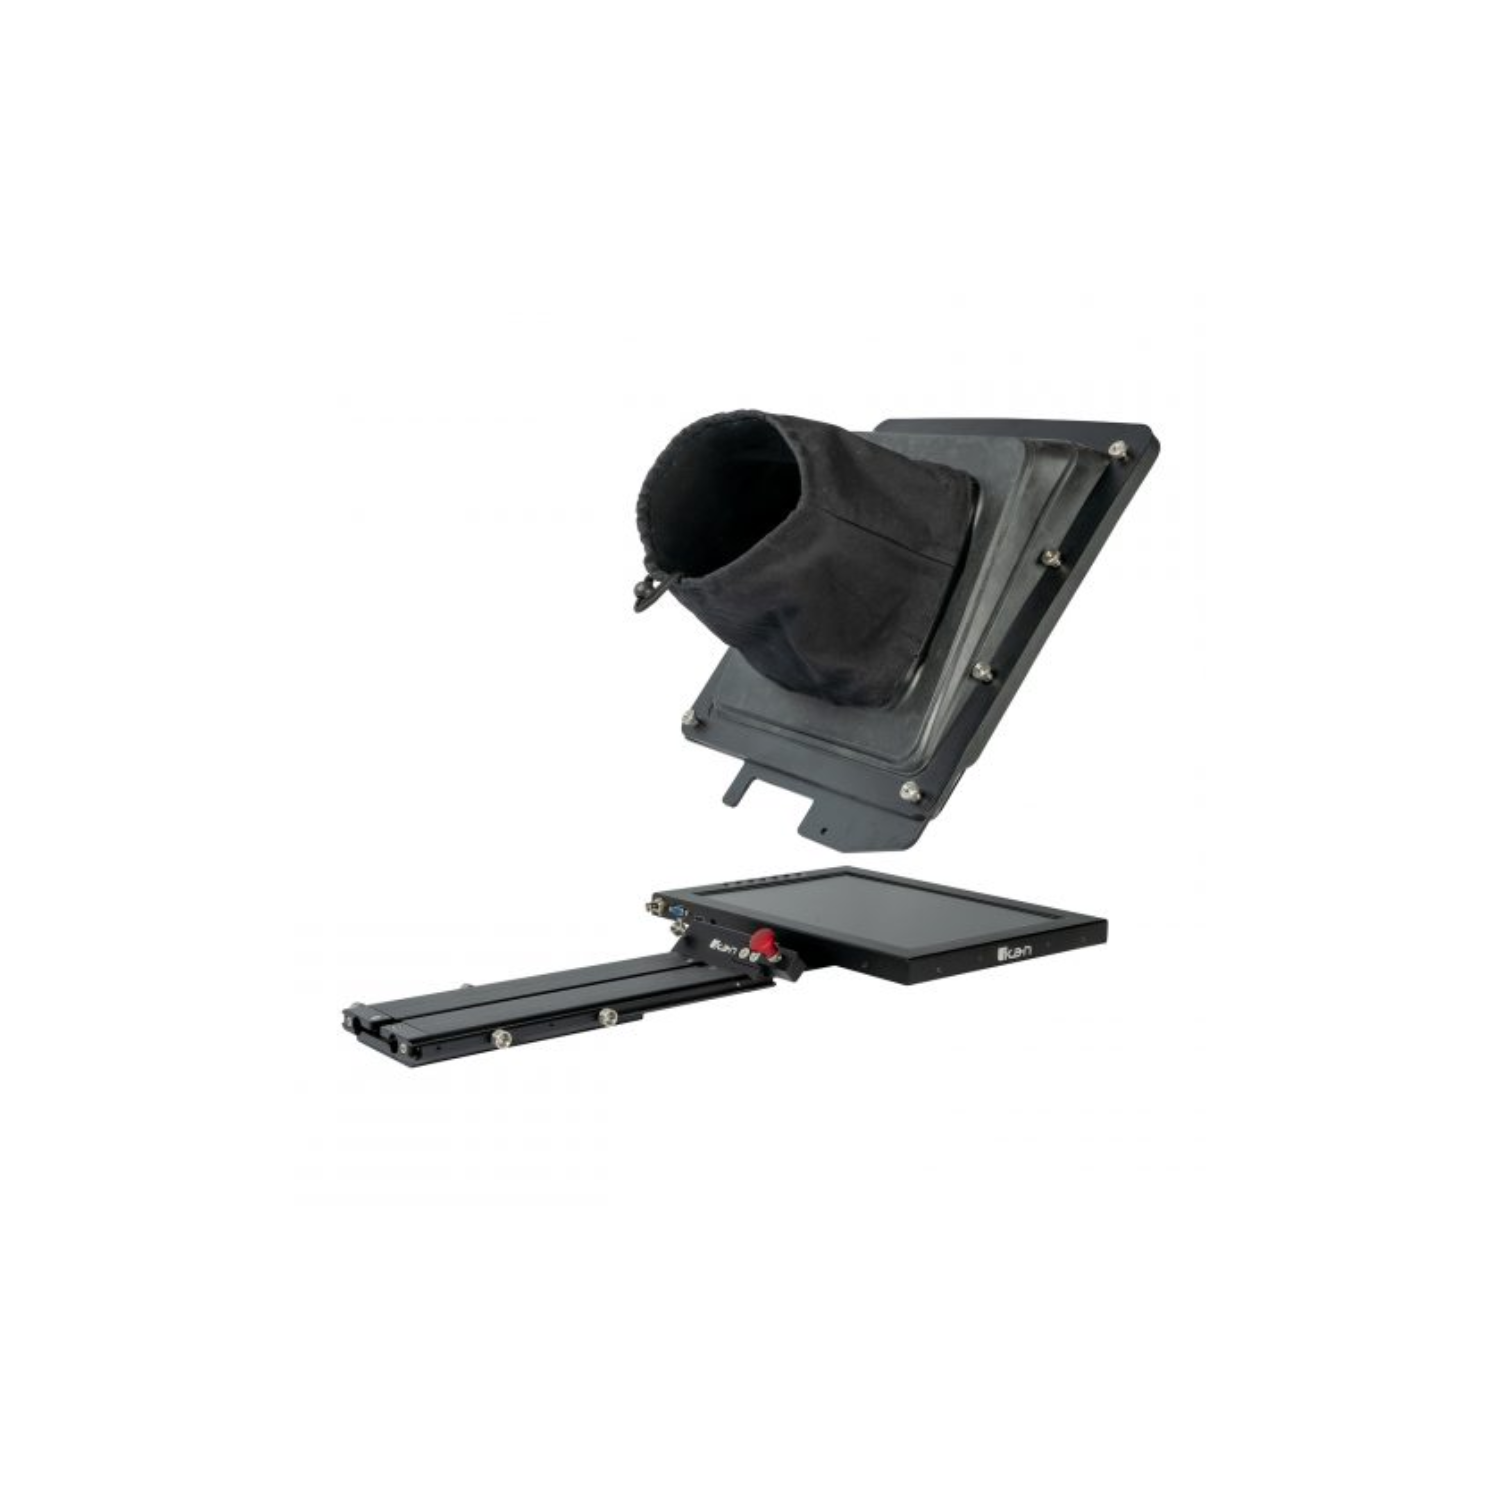 ikan Professional 17" High-Bright Teleprompter Travel Kit